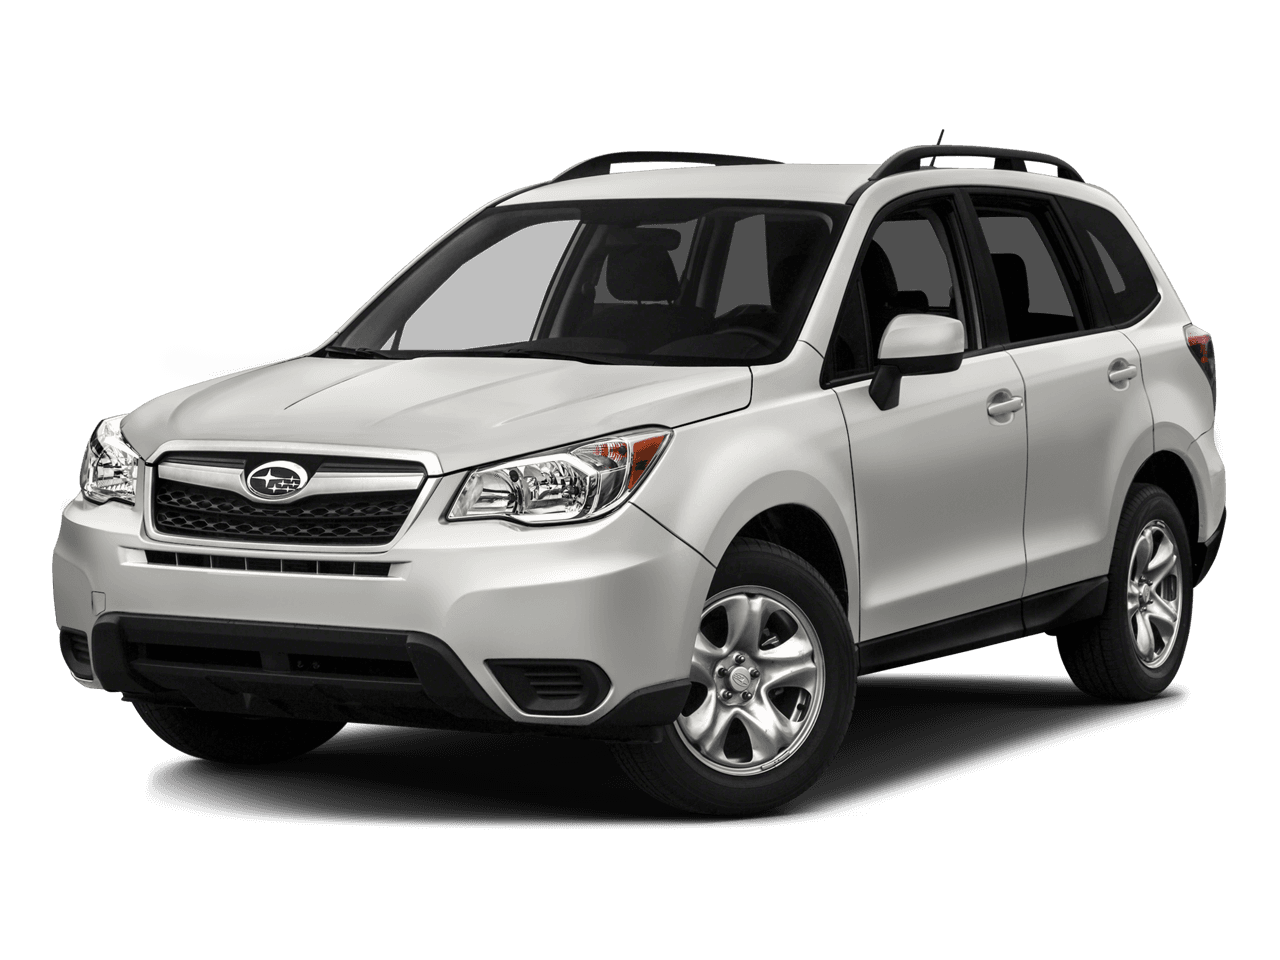 2016 Subaru Forester Photo in Bethesda, MD 20814